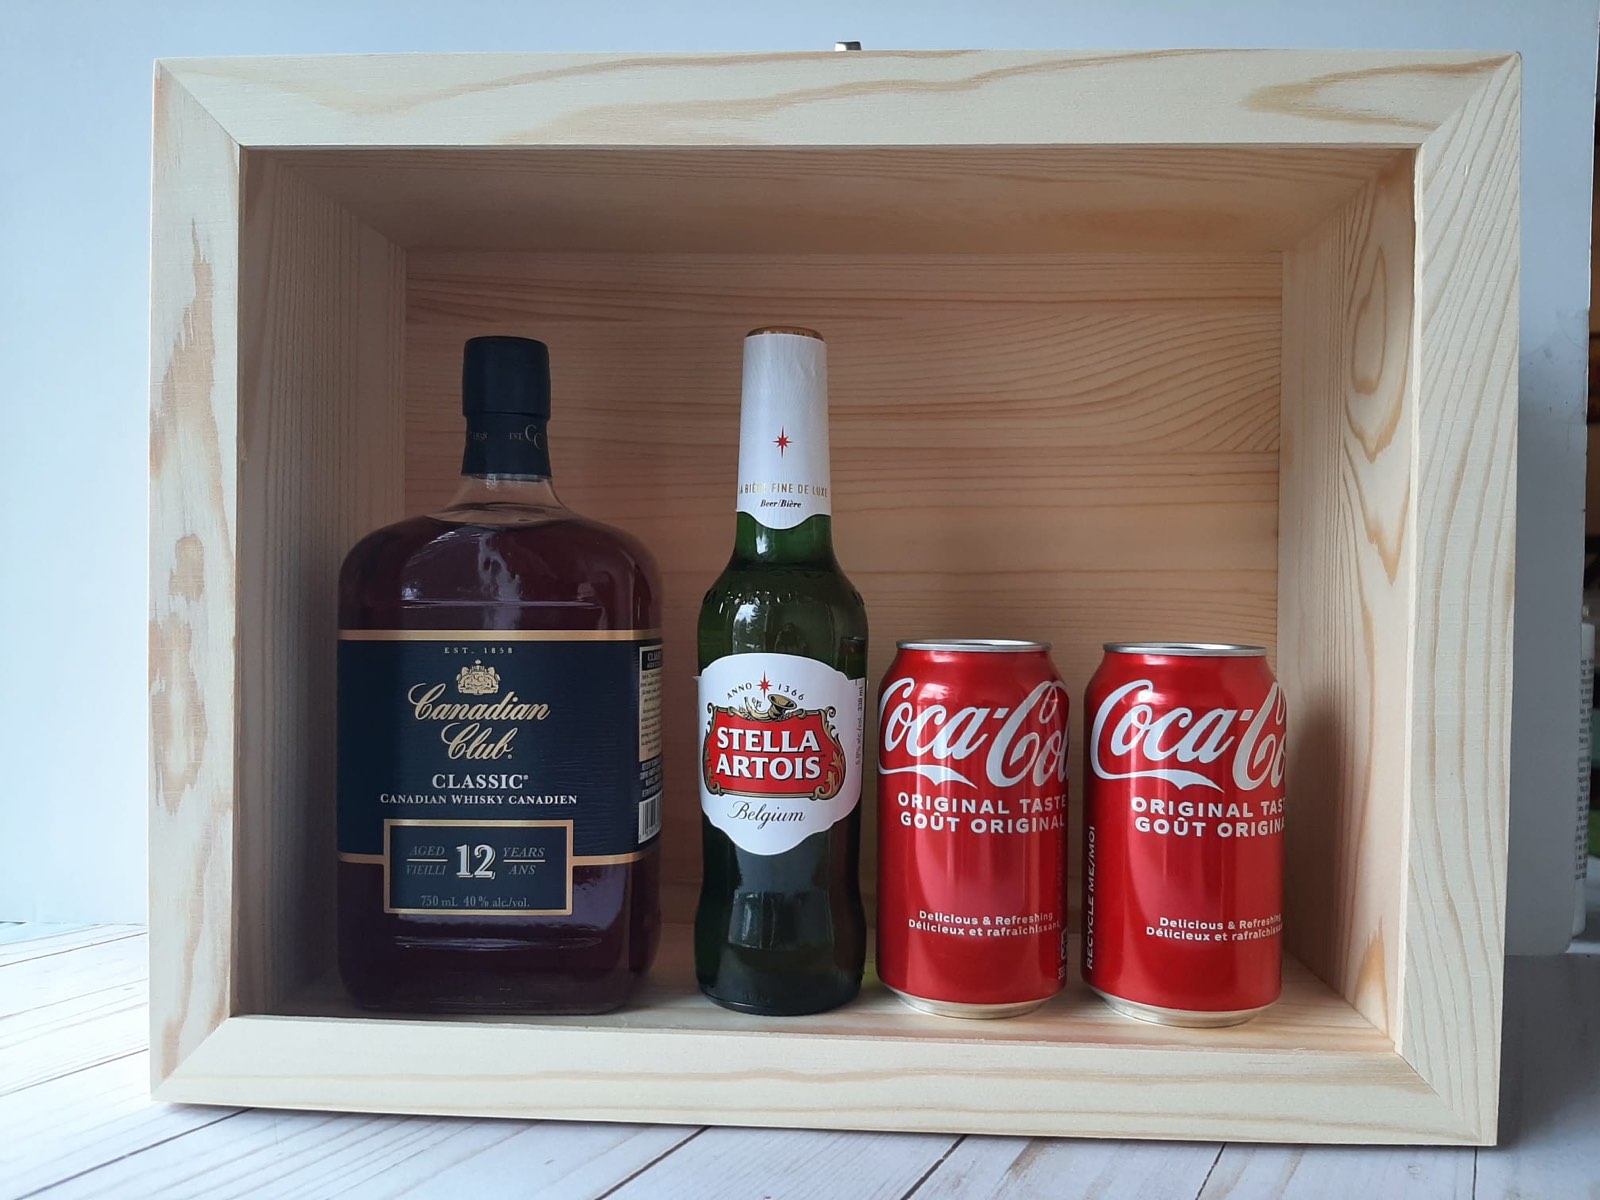 Shadow Box Display Case for bottles and cans